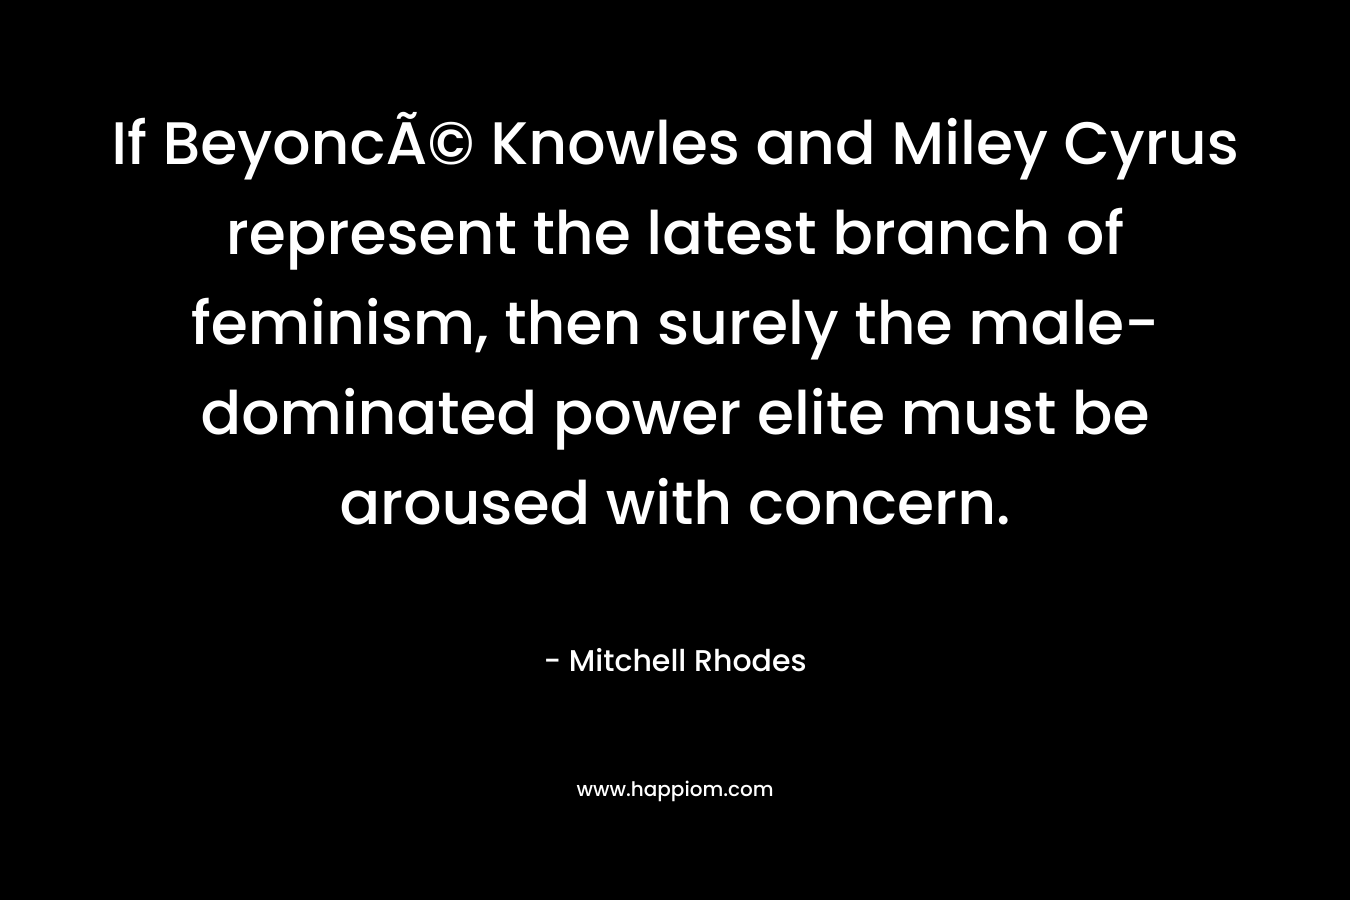 If BeyoncÃ© Knowles and Miley Cyrus represent the latest branch of feminism, then surely the male-dominated power elite must be aroused with concern.